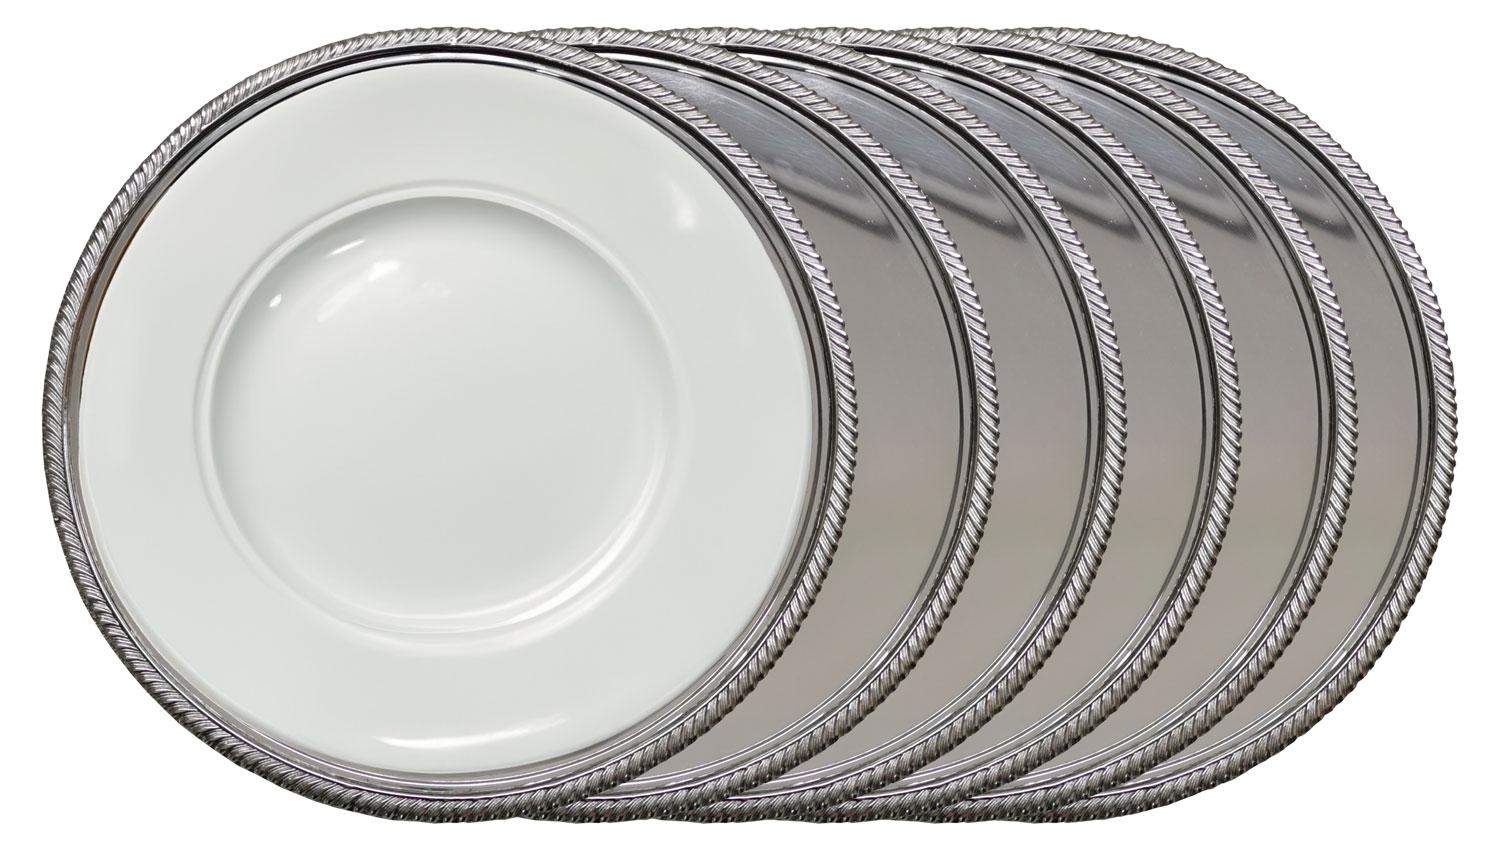 Simply Beautiful! Whether you are setting your table for a formal or informal occasion, Service Plates offer the hostess an opportunity to set the atmosphere for the decor of the table with Timeless Elegance. These stunning under plates are always